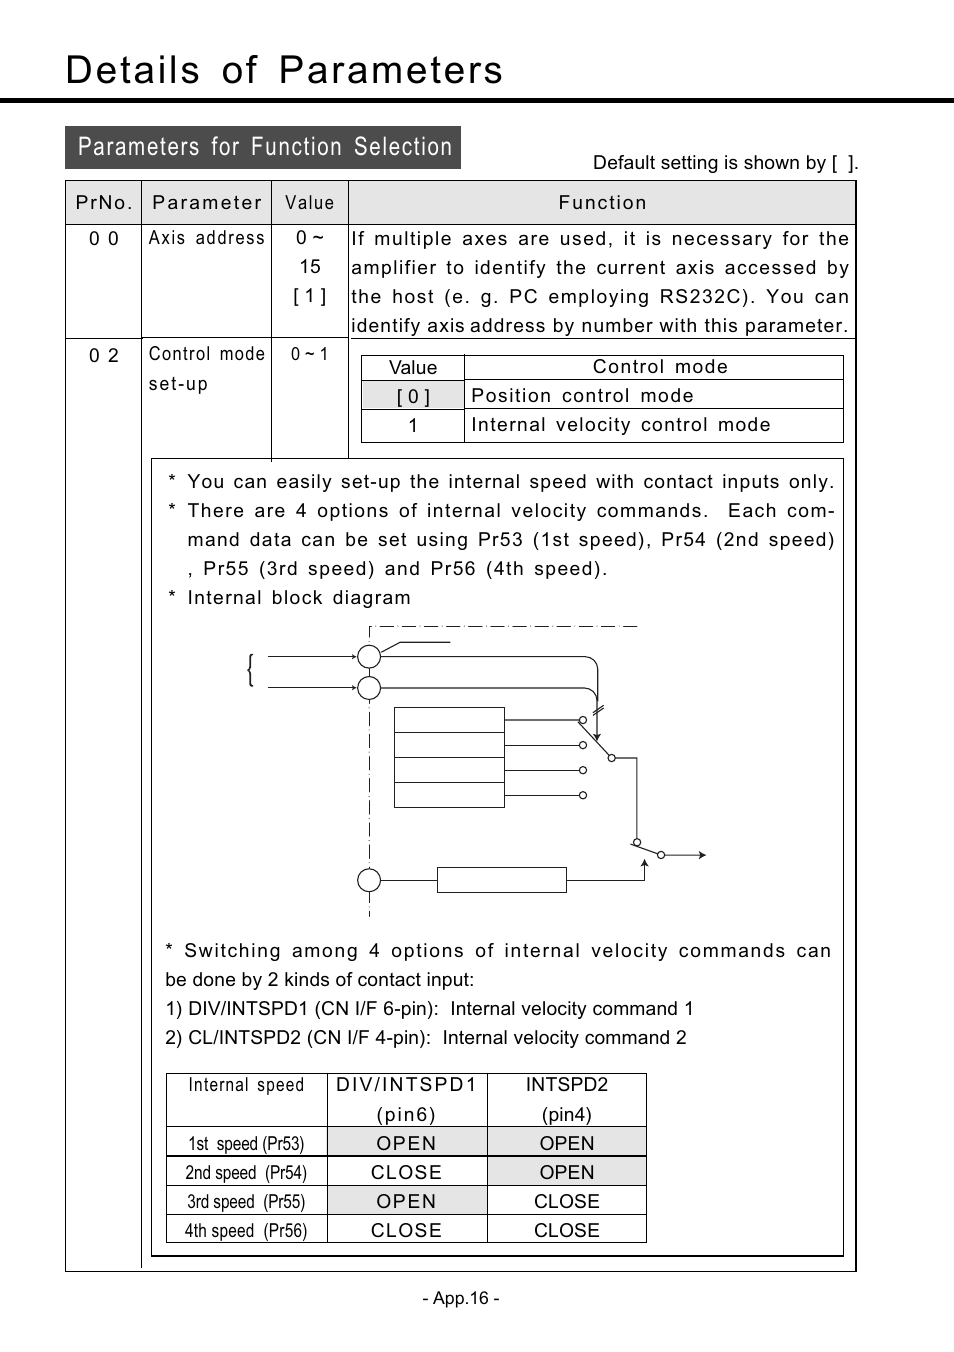 Details of parameters, Details of parameters ••••••••••••• app. 16, App. 16 | Parameters for function selection | Panasonic MDDDT5540 User Manual | Page 90 / 133